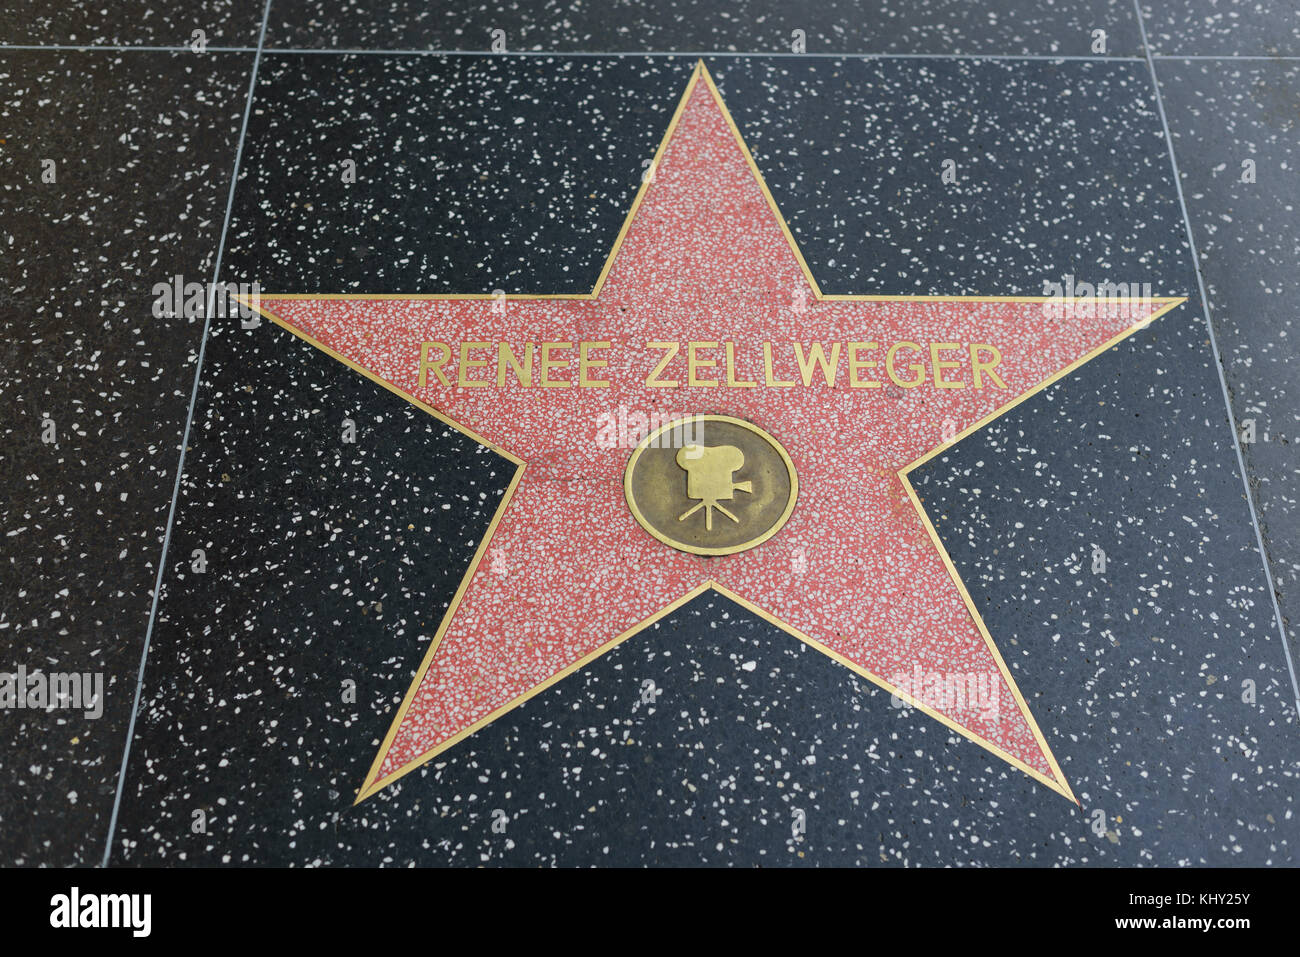 HOLLYWOOD, CA - DECEMBER 06: Renee Zellweger star on the Hollywood Walk of Fame in Hollywood, California on Dec. 6, 2016. Stock Photo